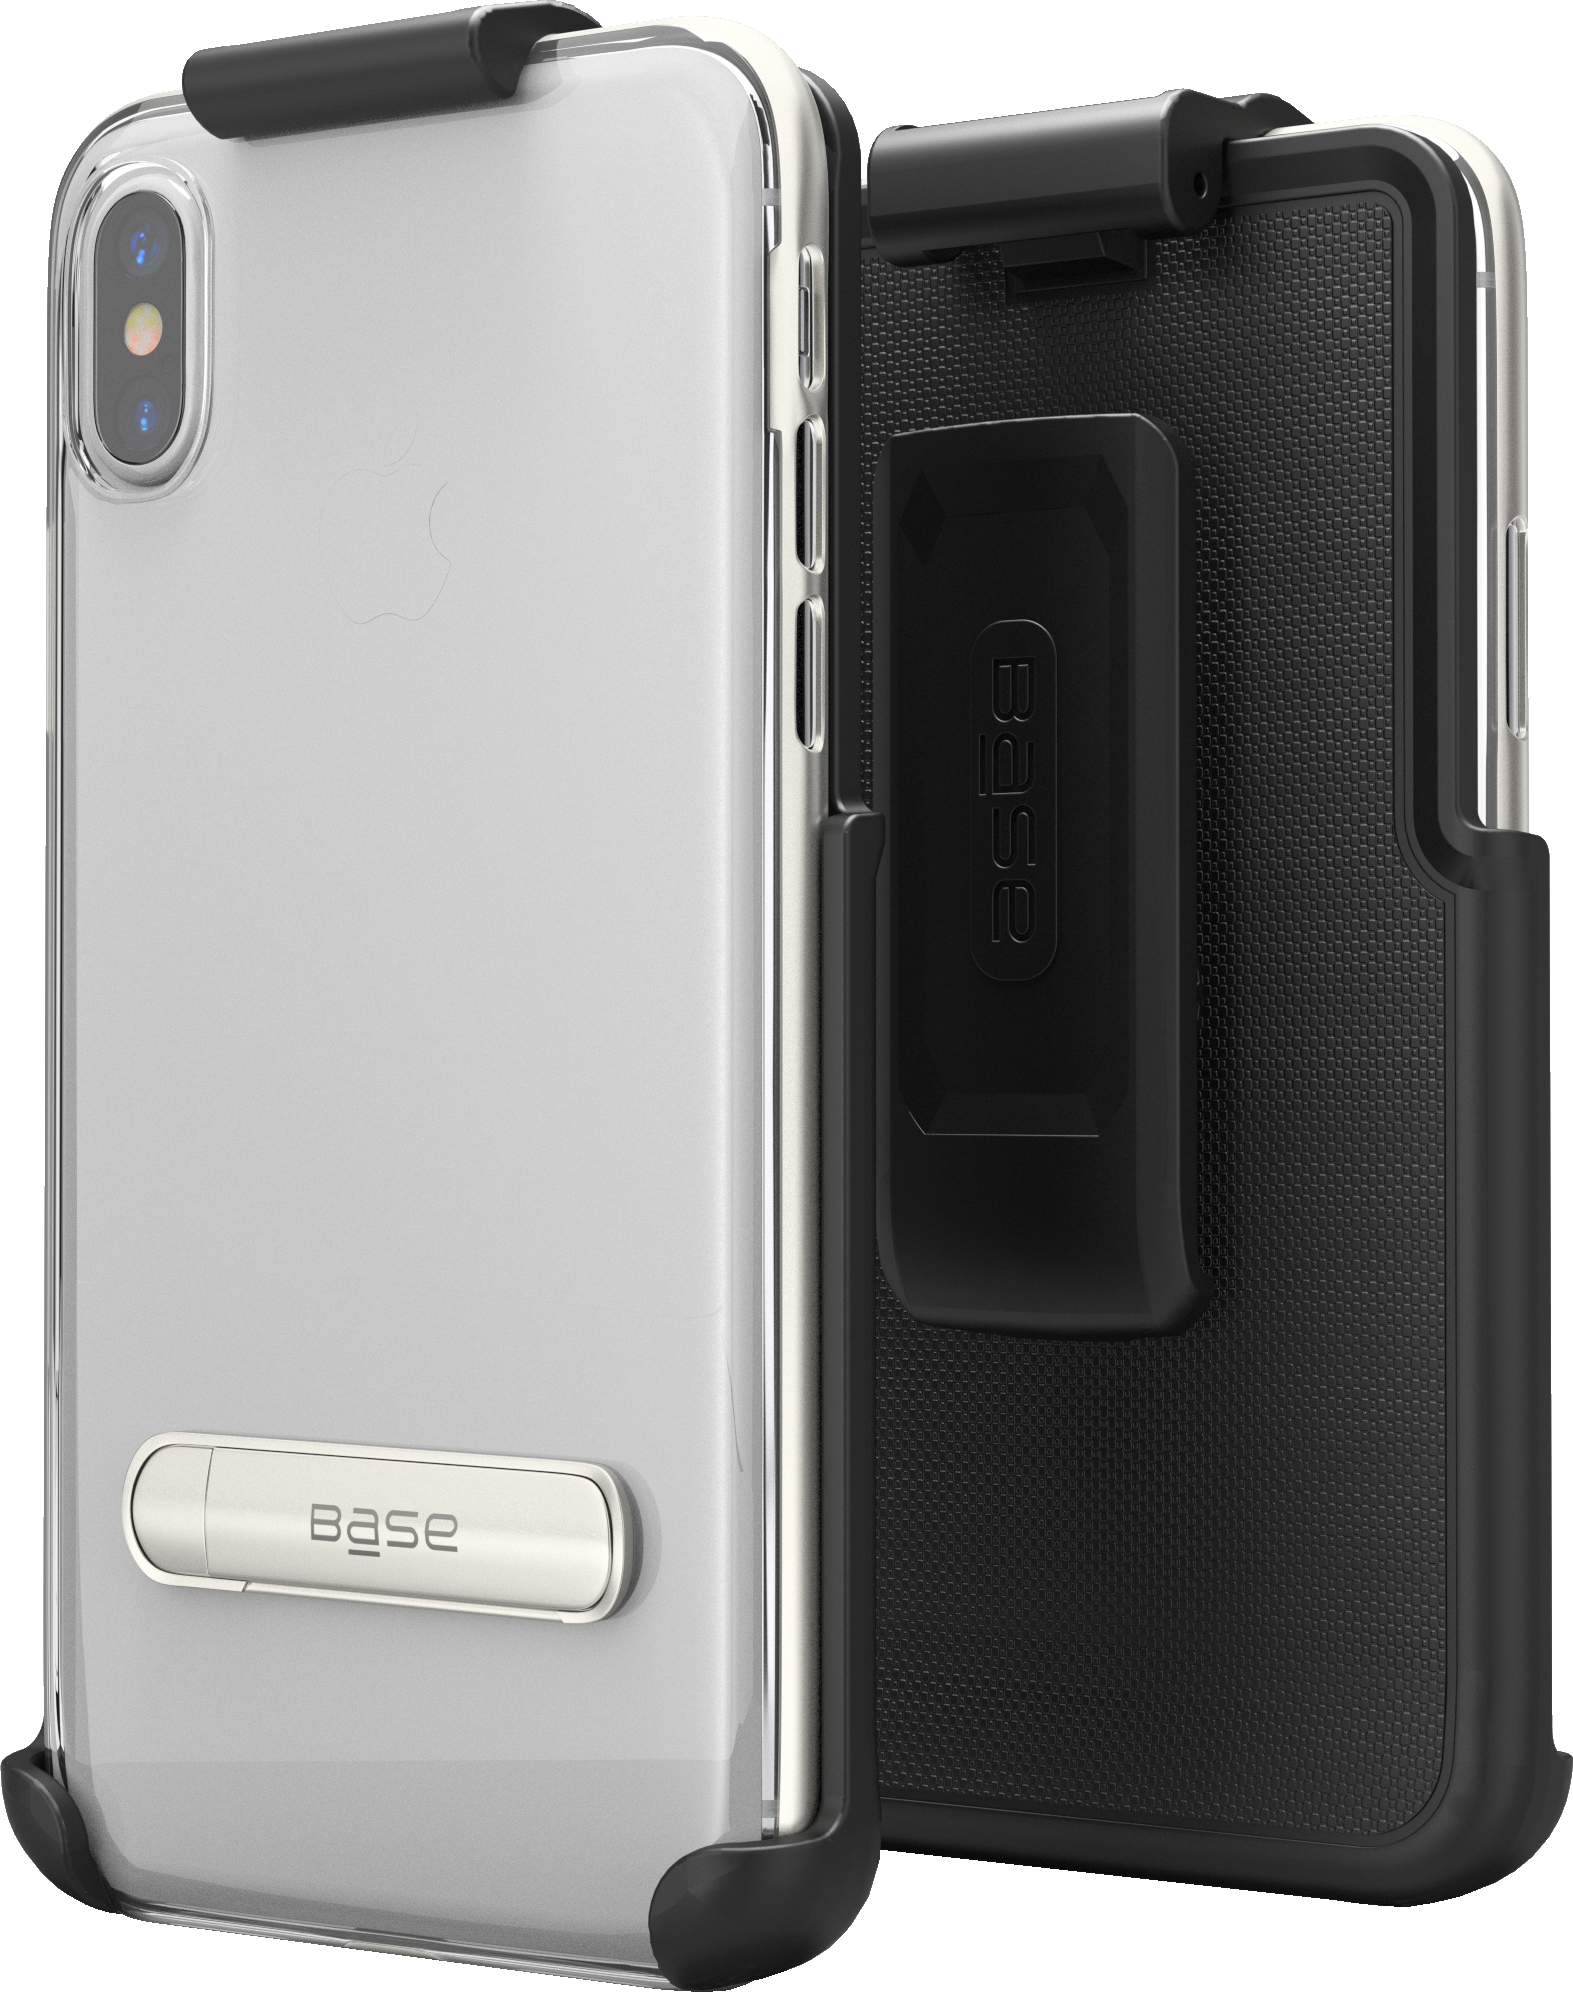 Base DuoHybrid - Reinforced Protective Case w/ Kickstand Holster Combo for iPhone X Max - Silver